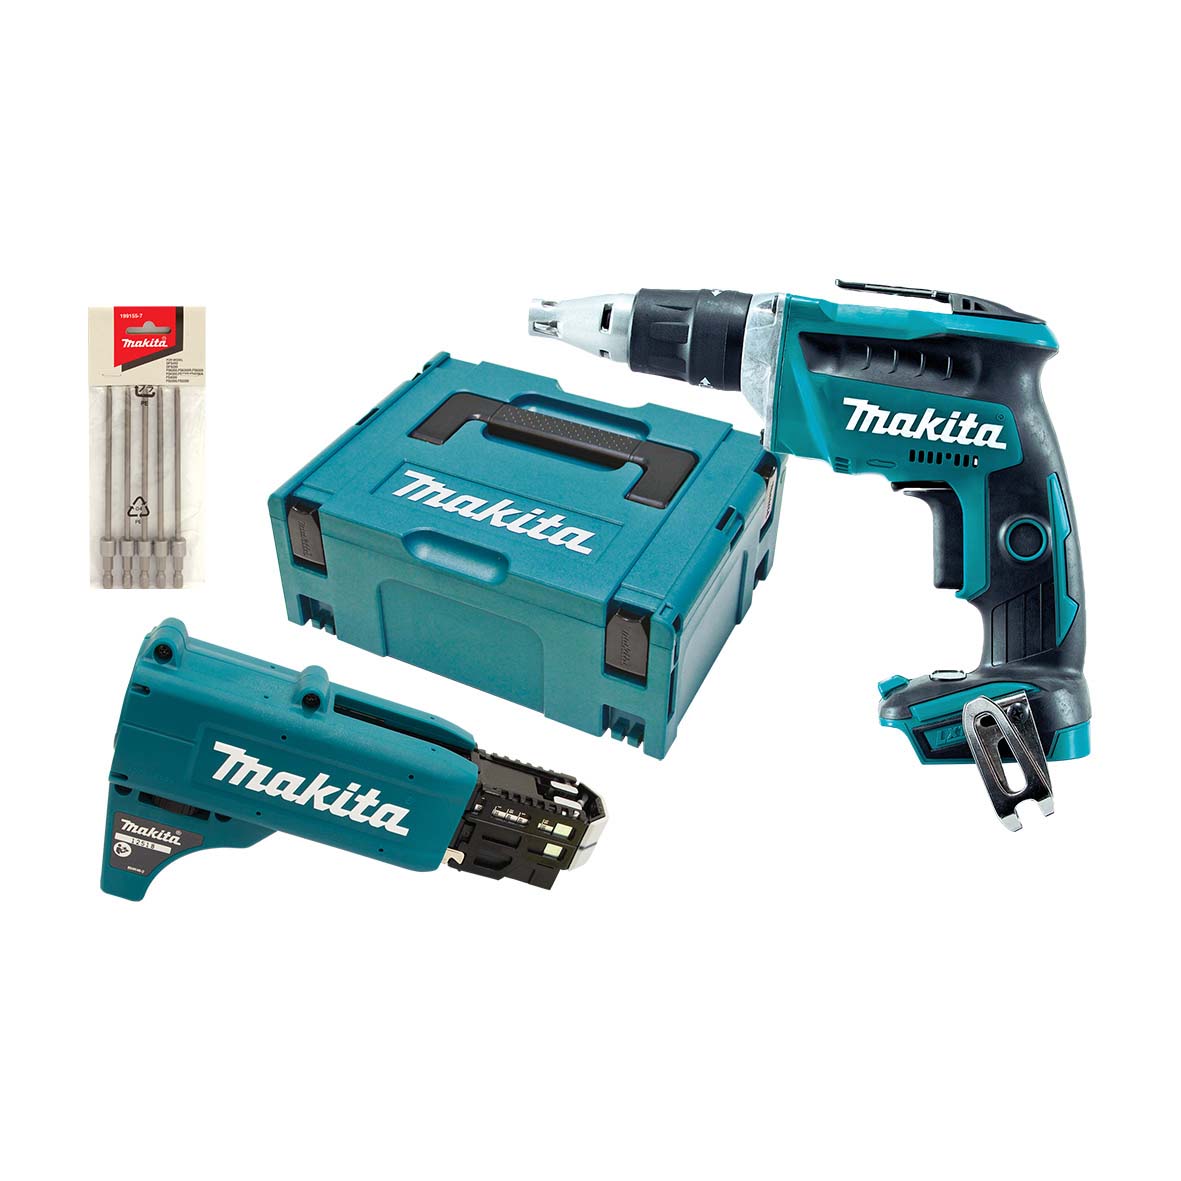 18V Brushless High Speed Screwdriver Bare (Tool Only) DFS452ZJX2 by Makita